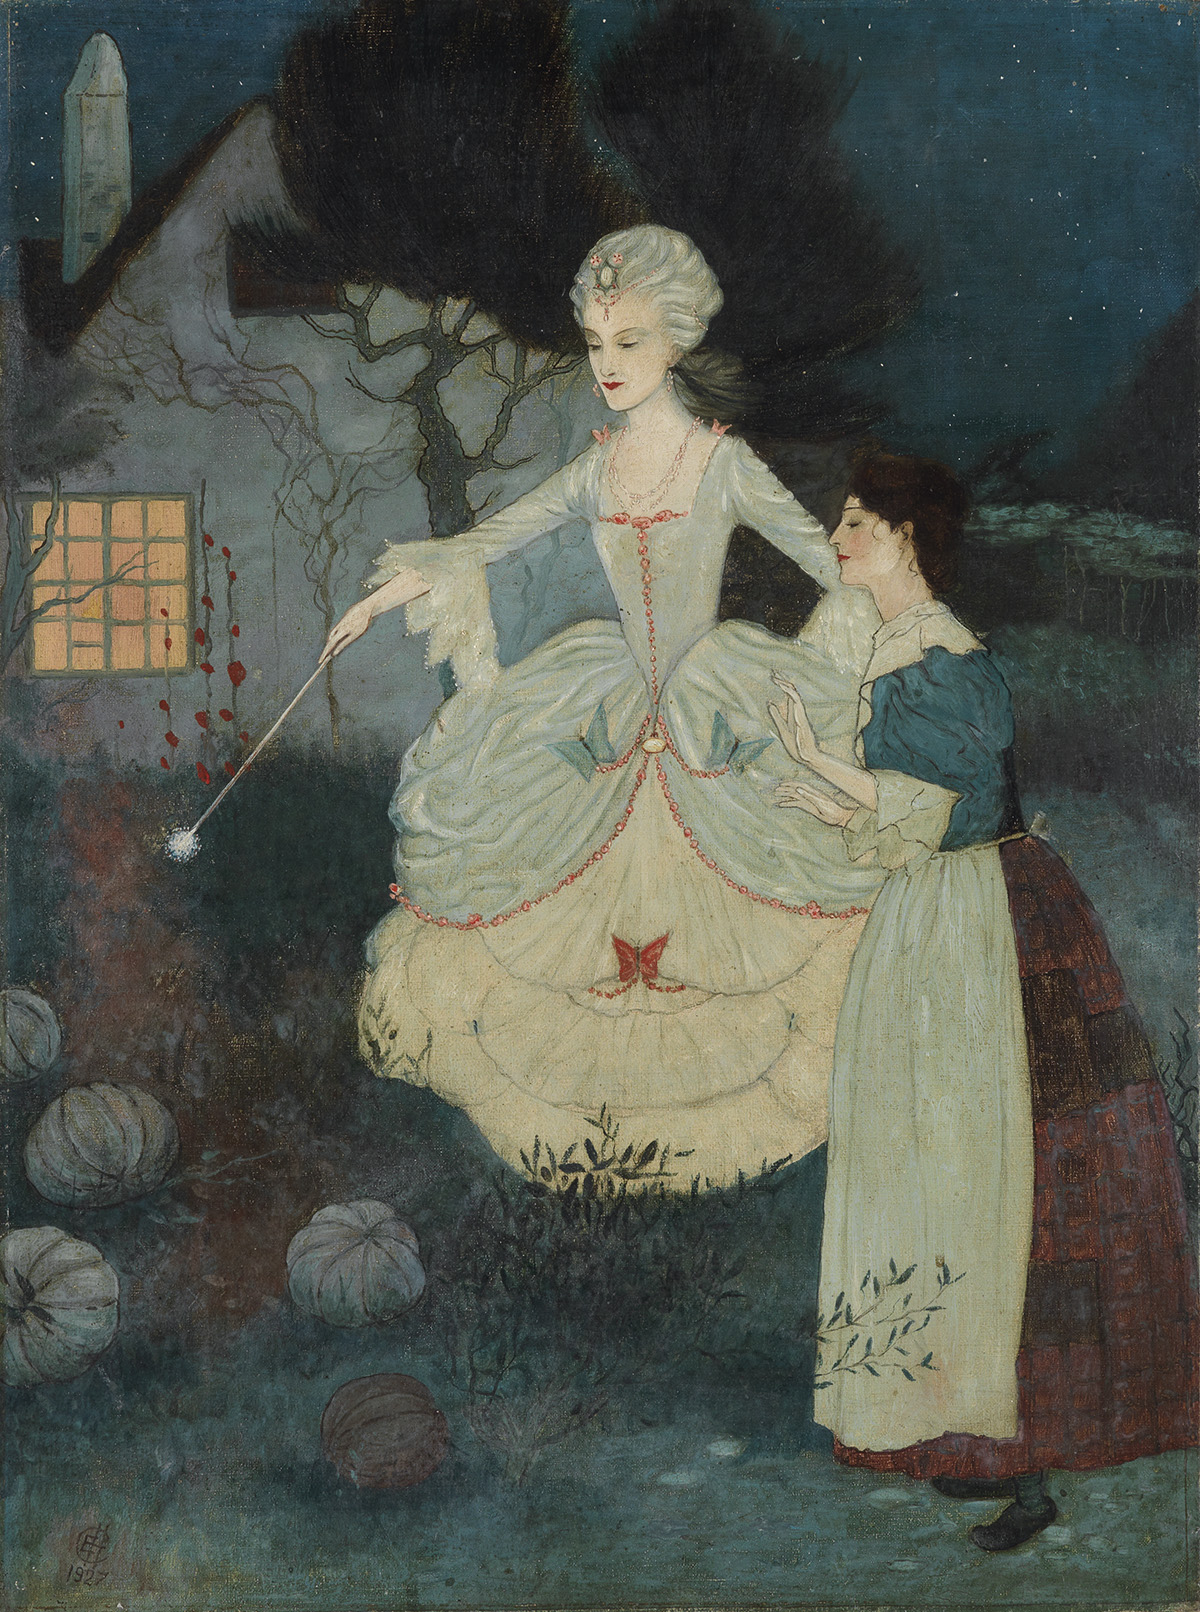 CHILDRENS FABLES (CHAPMAN, FREDERICK TRENCH (attributed to). Cinderella and the Fairy Godmother.